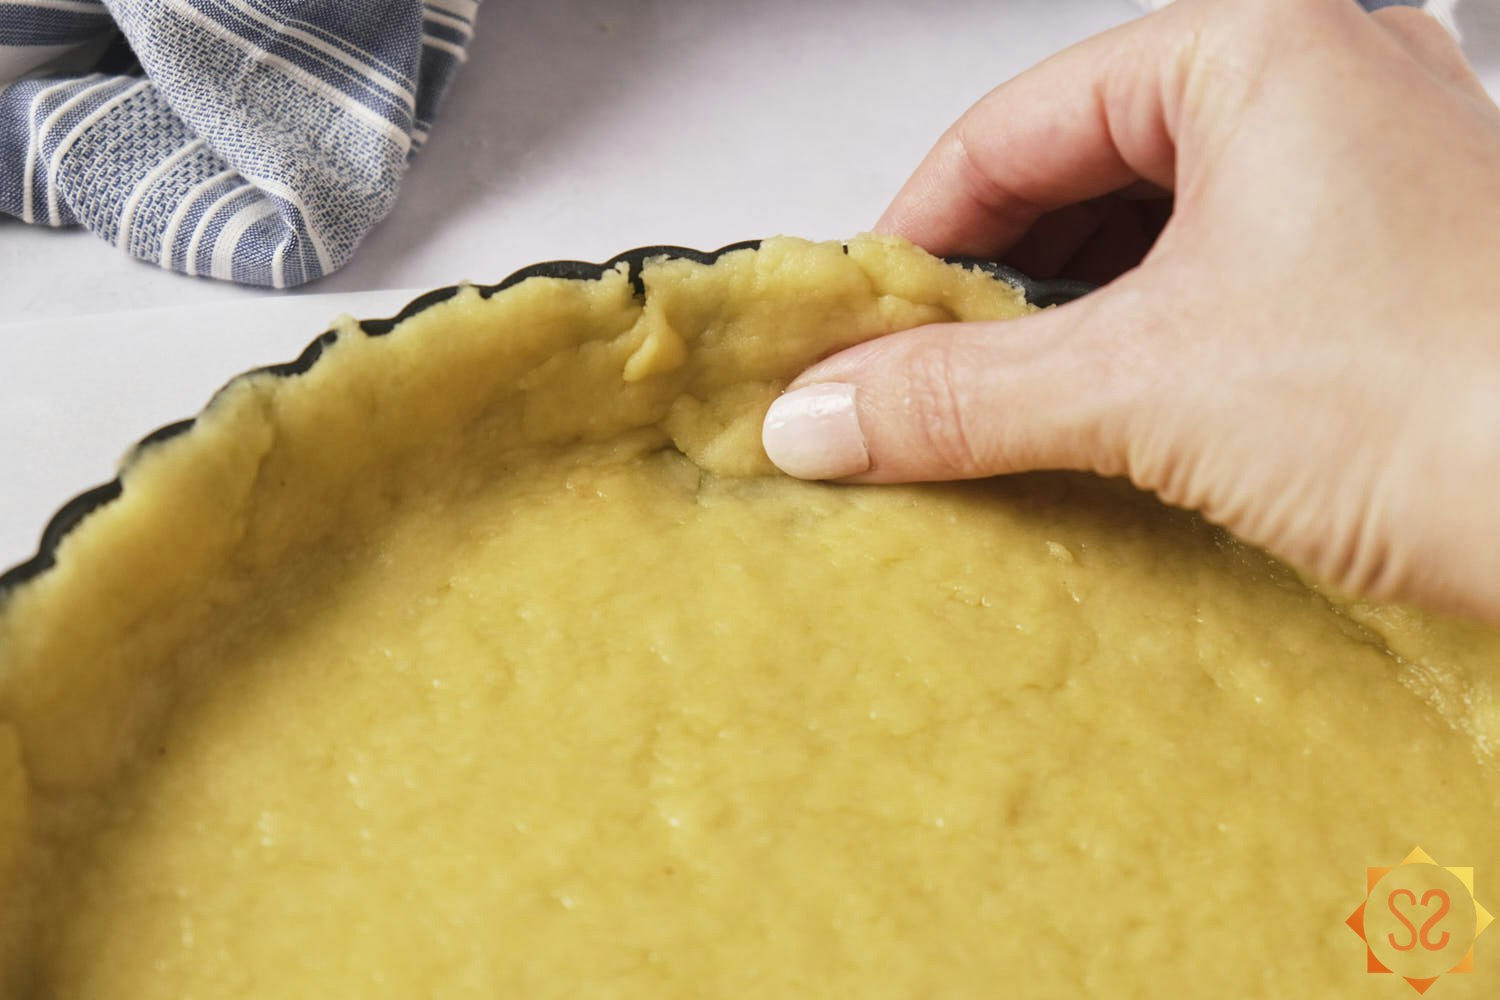 A hand pressing a piece of dough into a part of the crust that requires a patch.